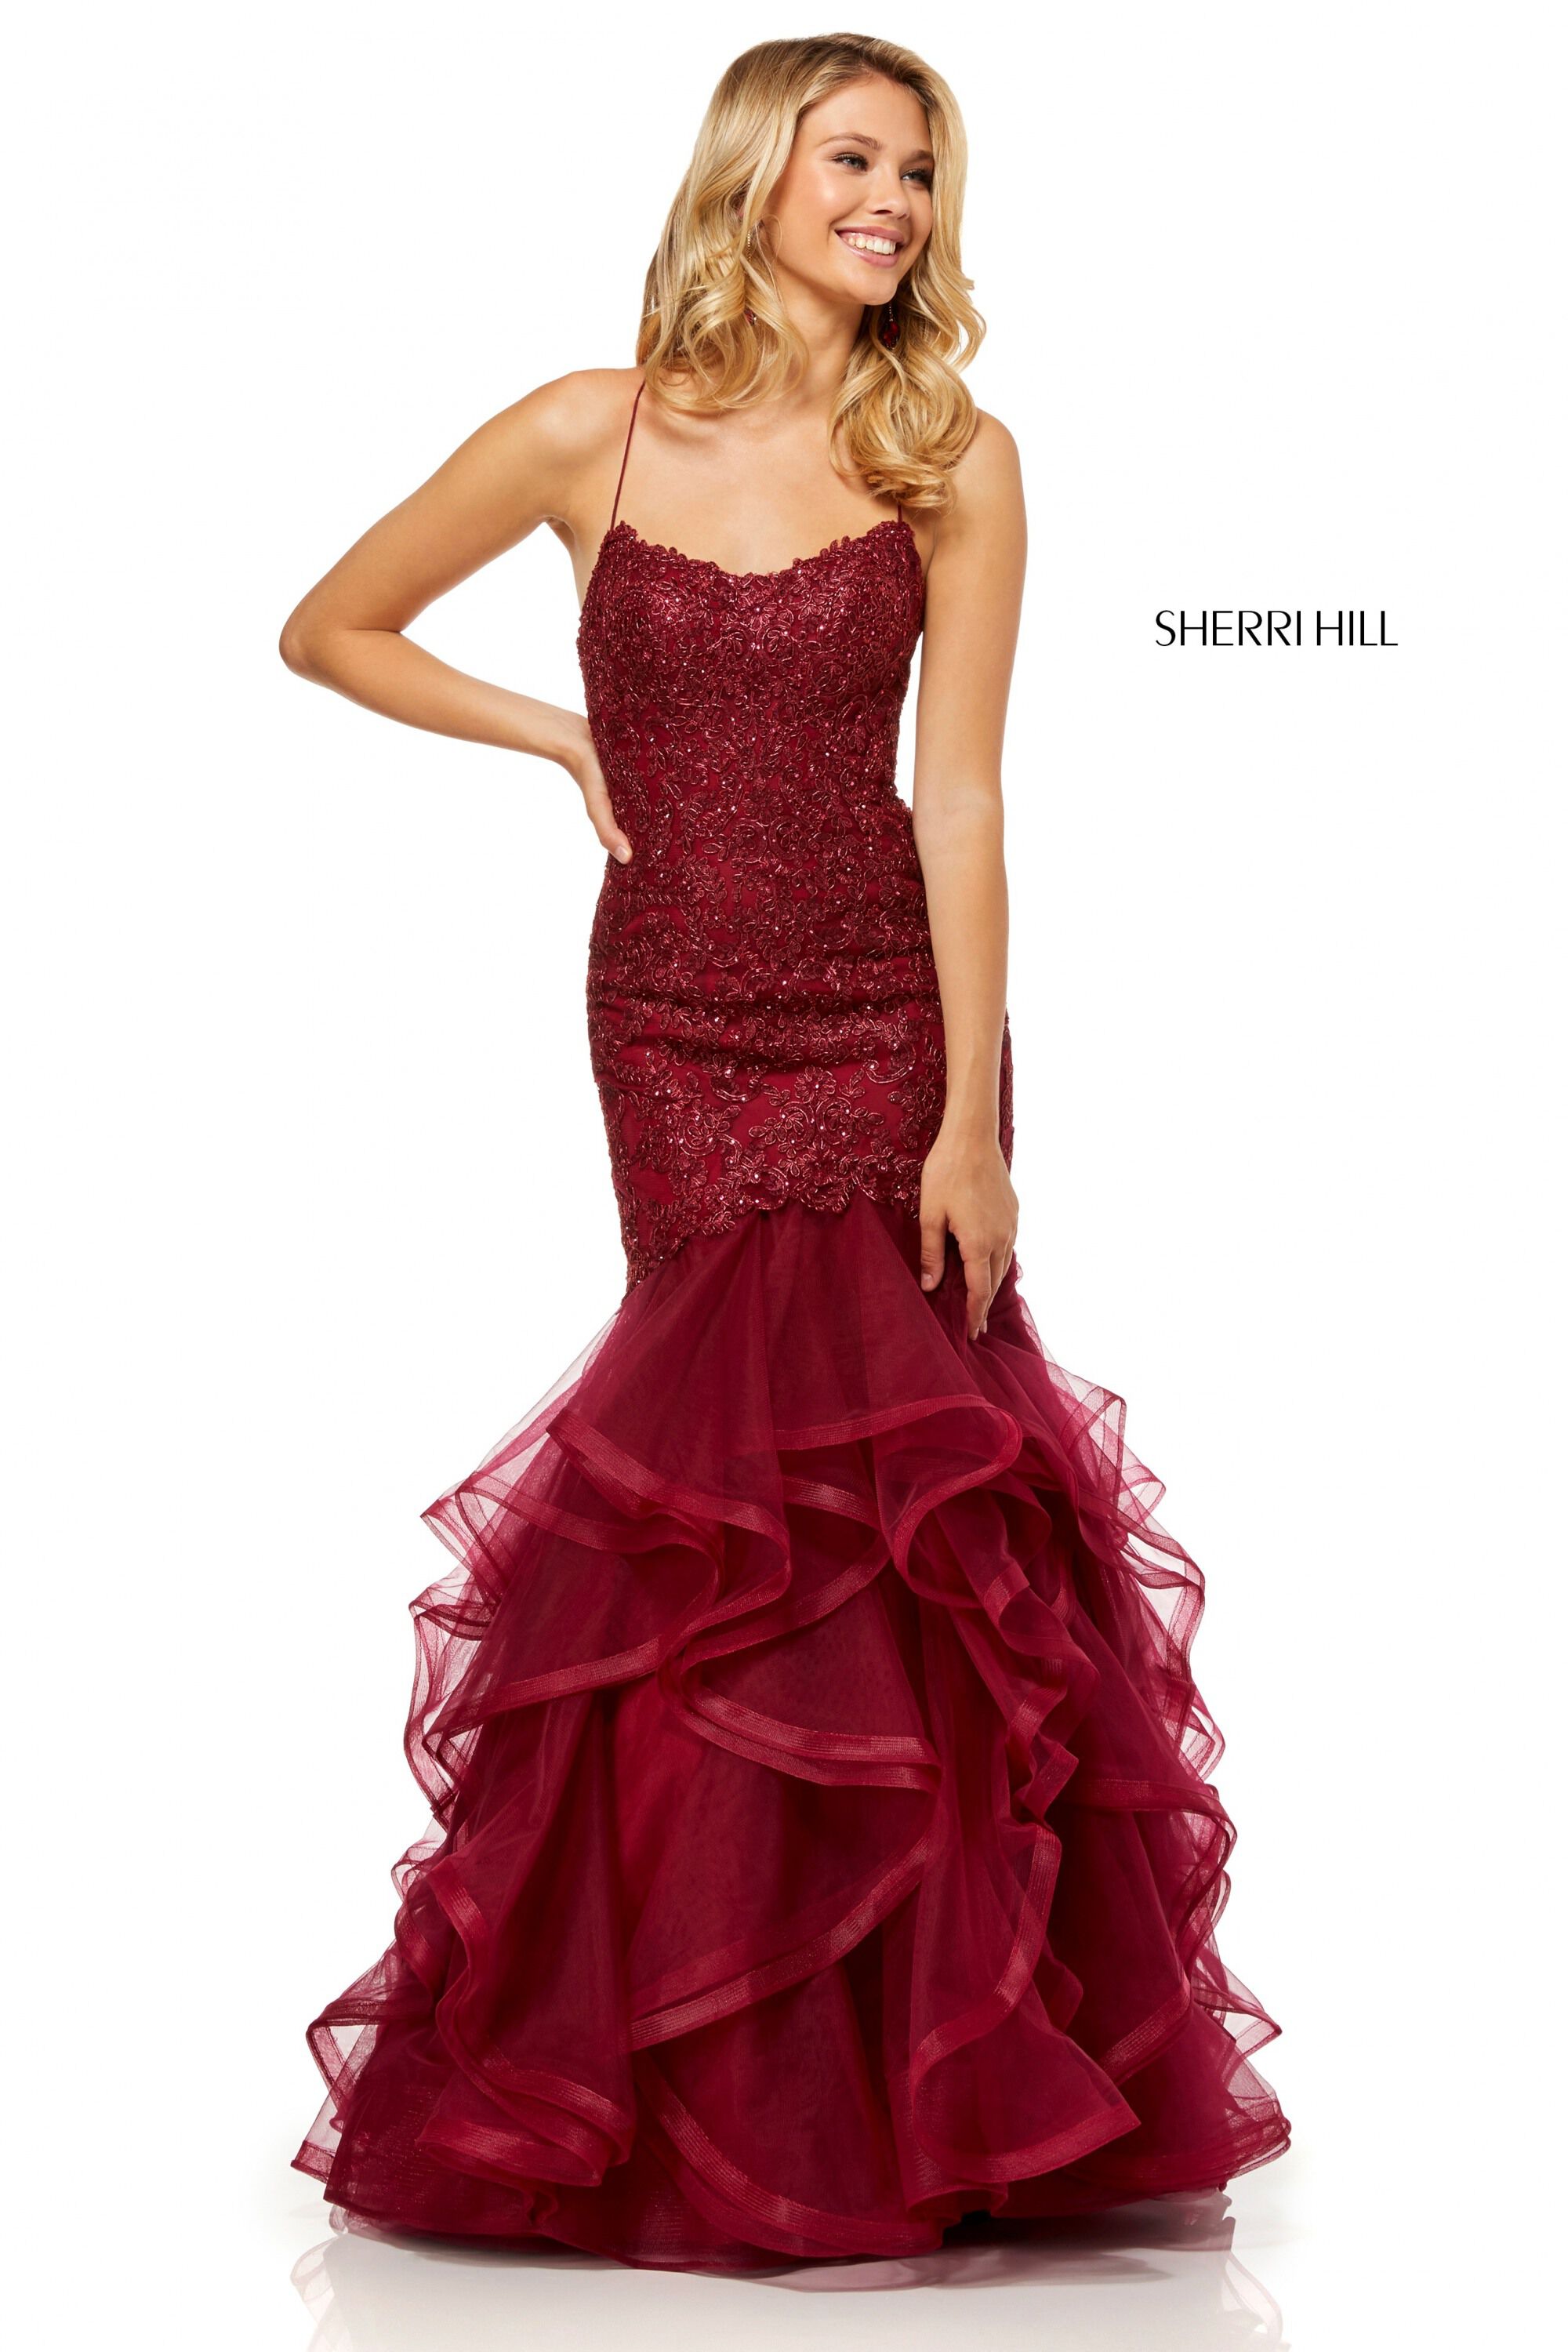 style № 52560 designed by SherriHill